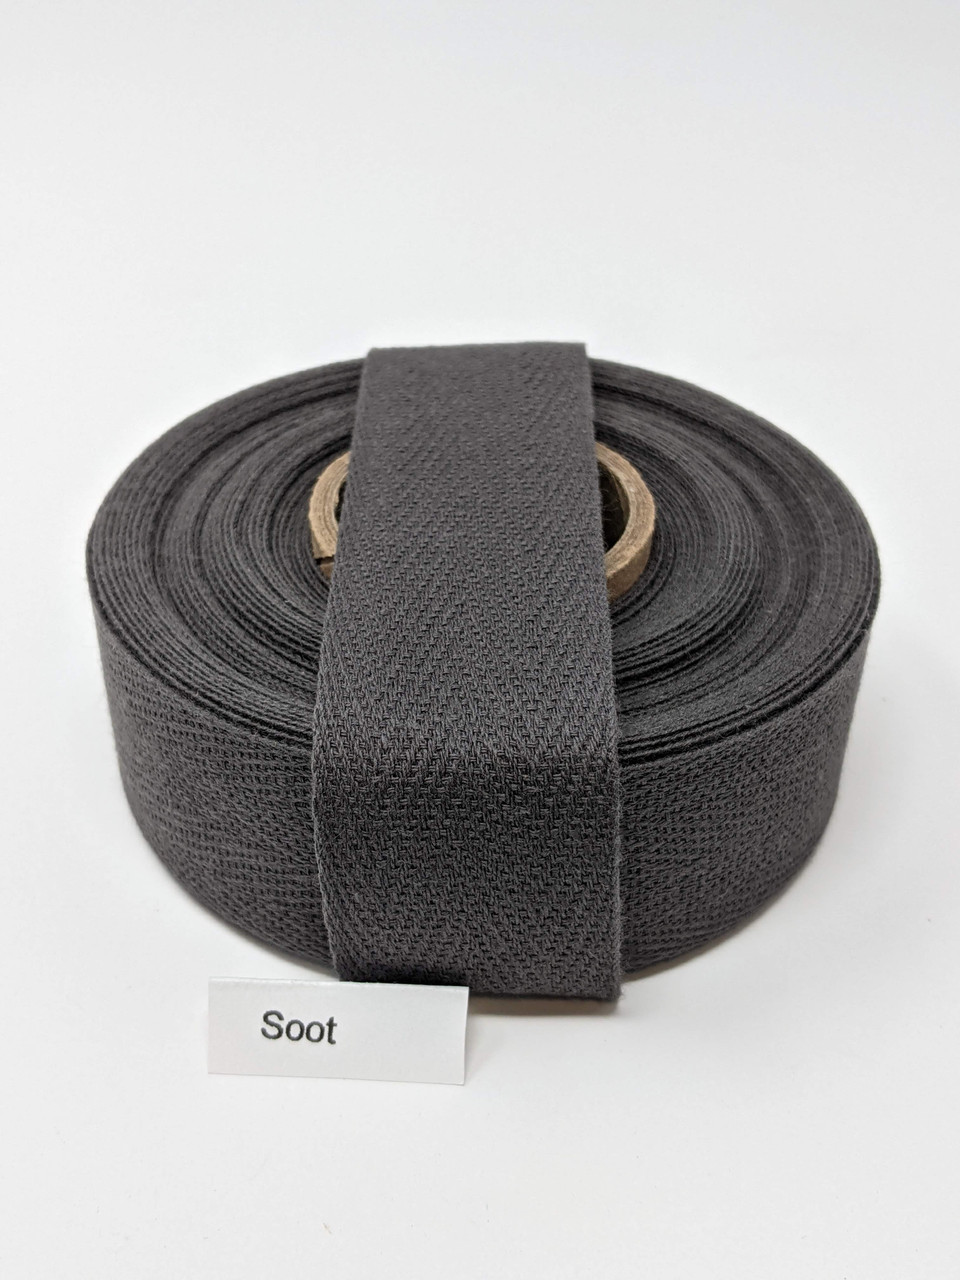 Cotton Twill Tape, 5/8” by 25 yards